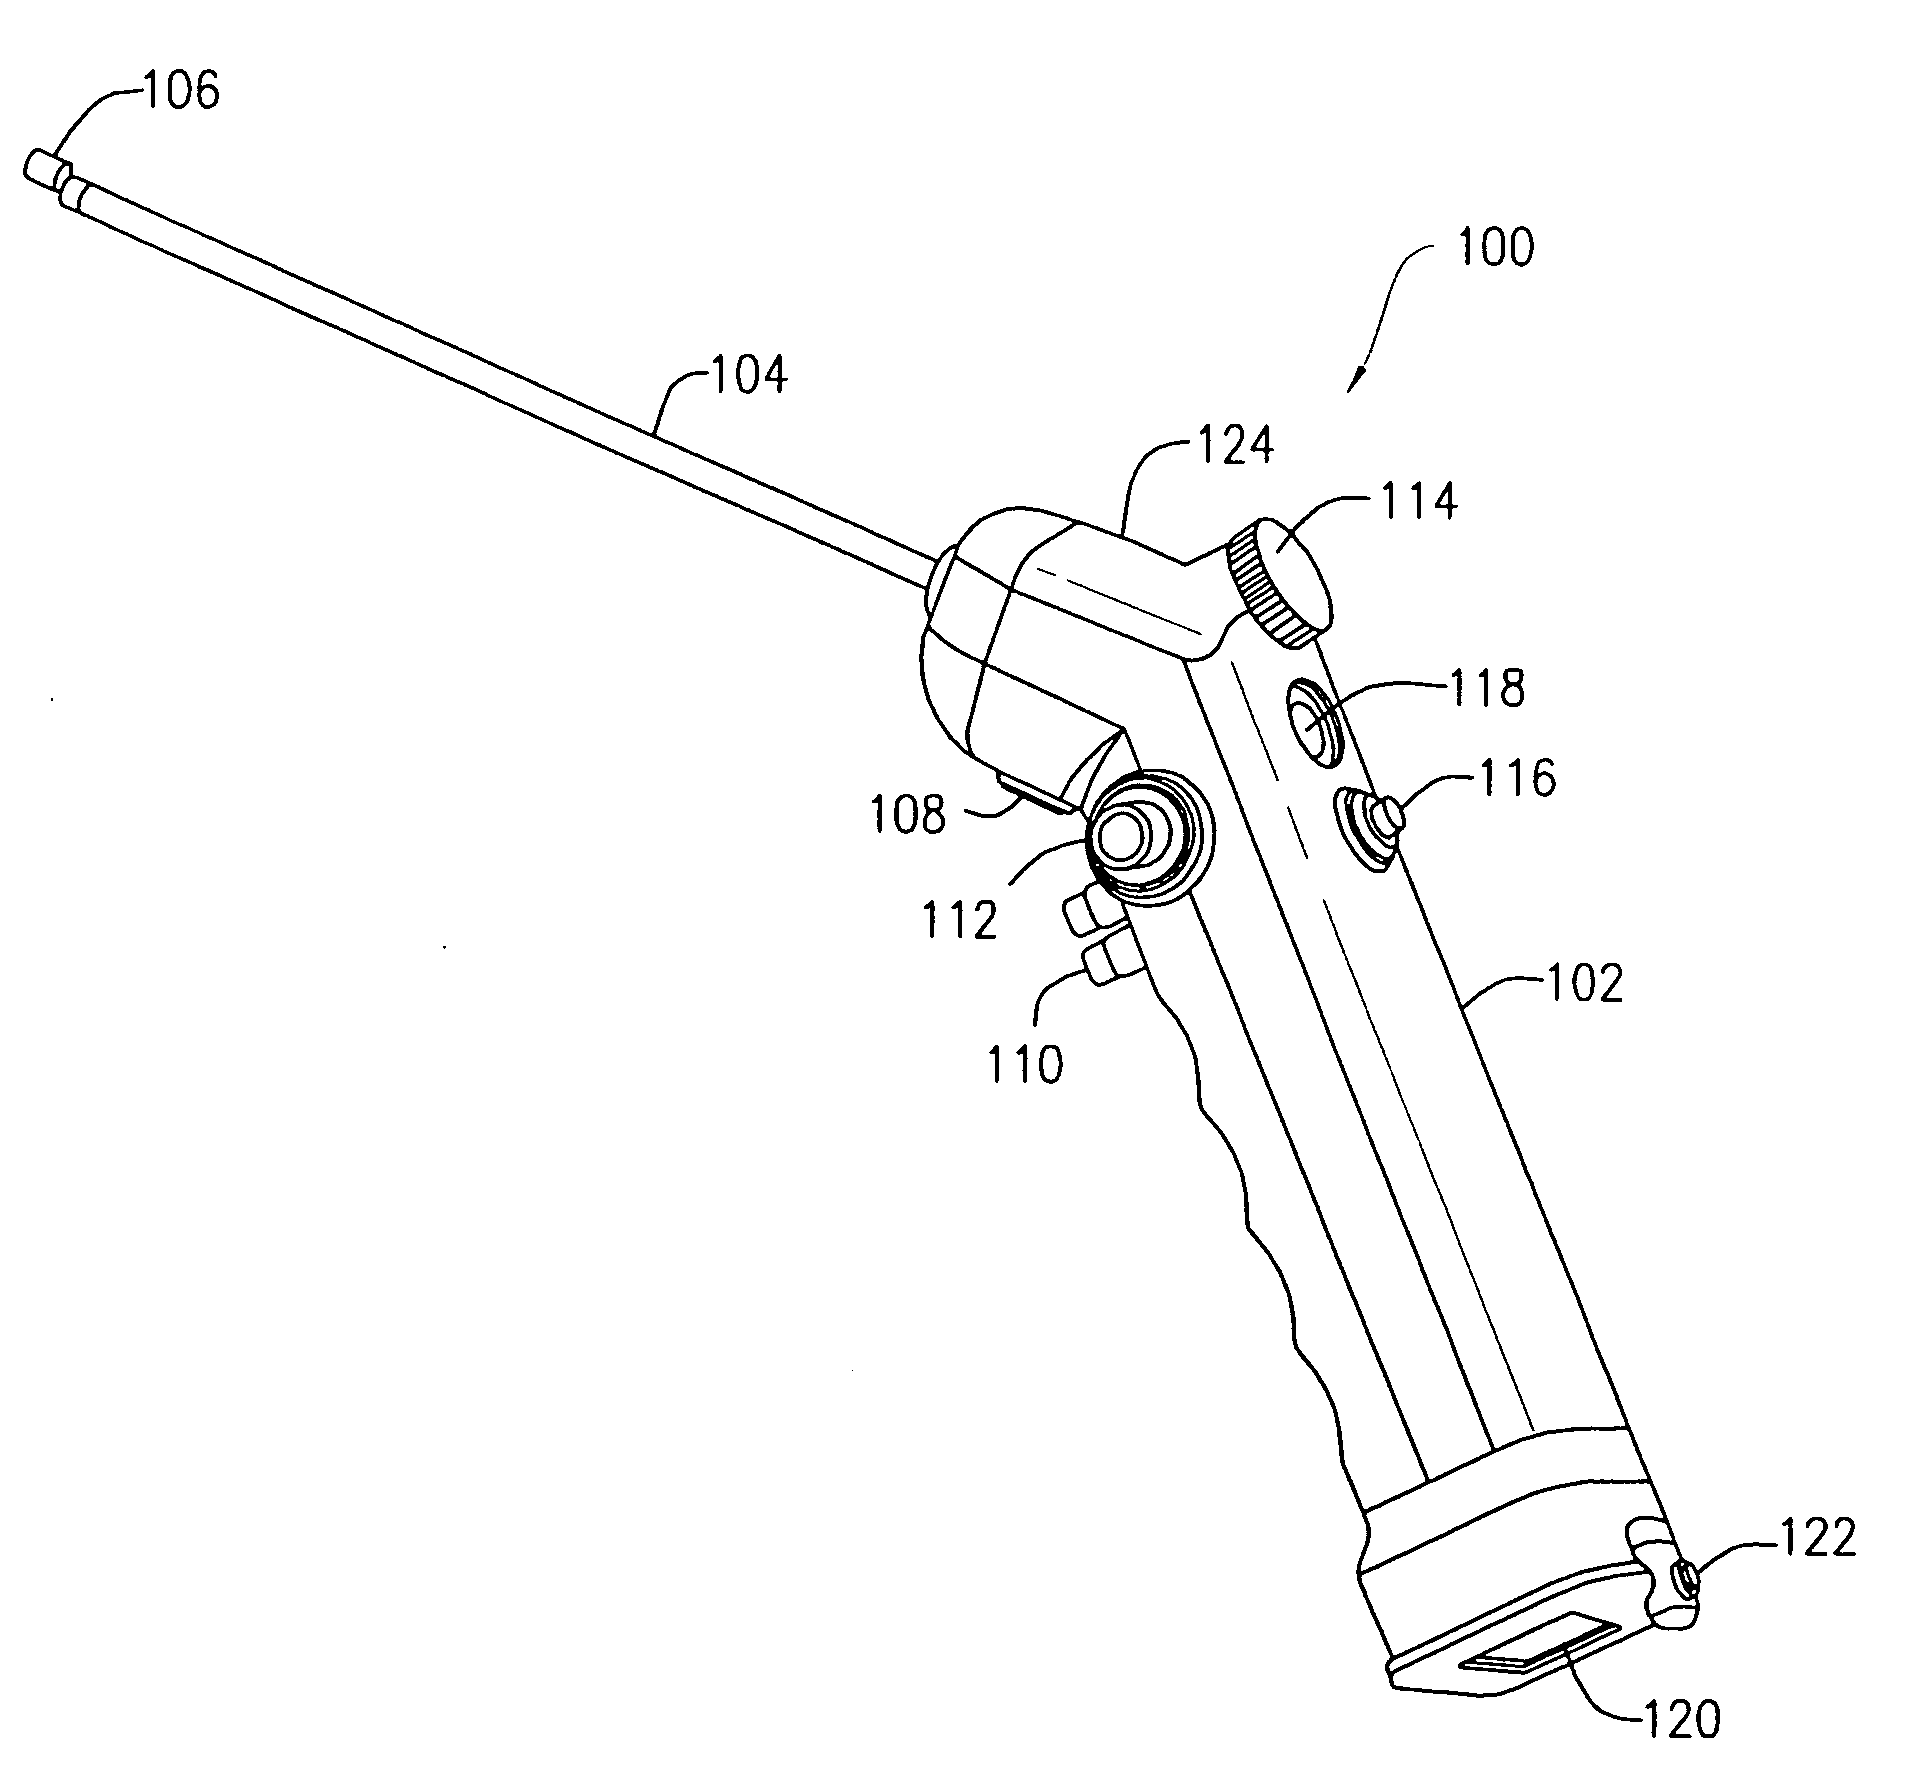 Optical surgical device and method of use